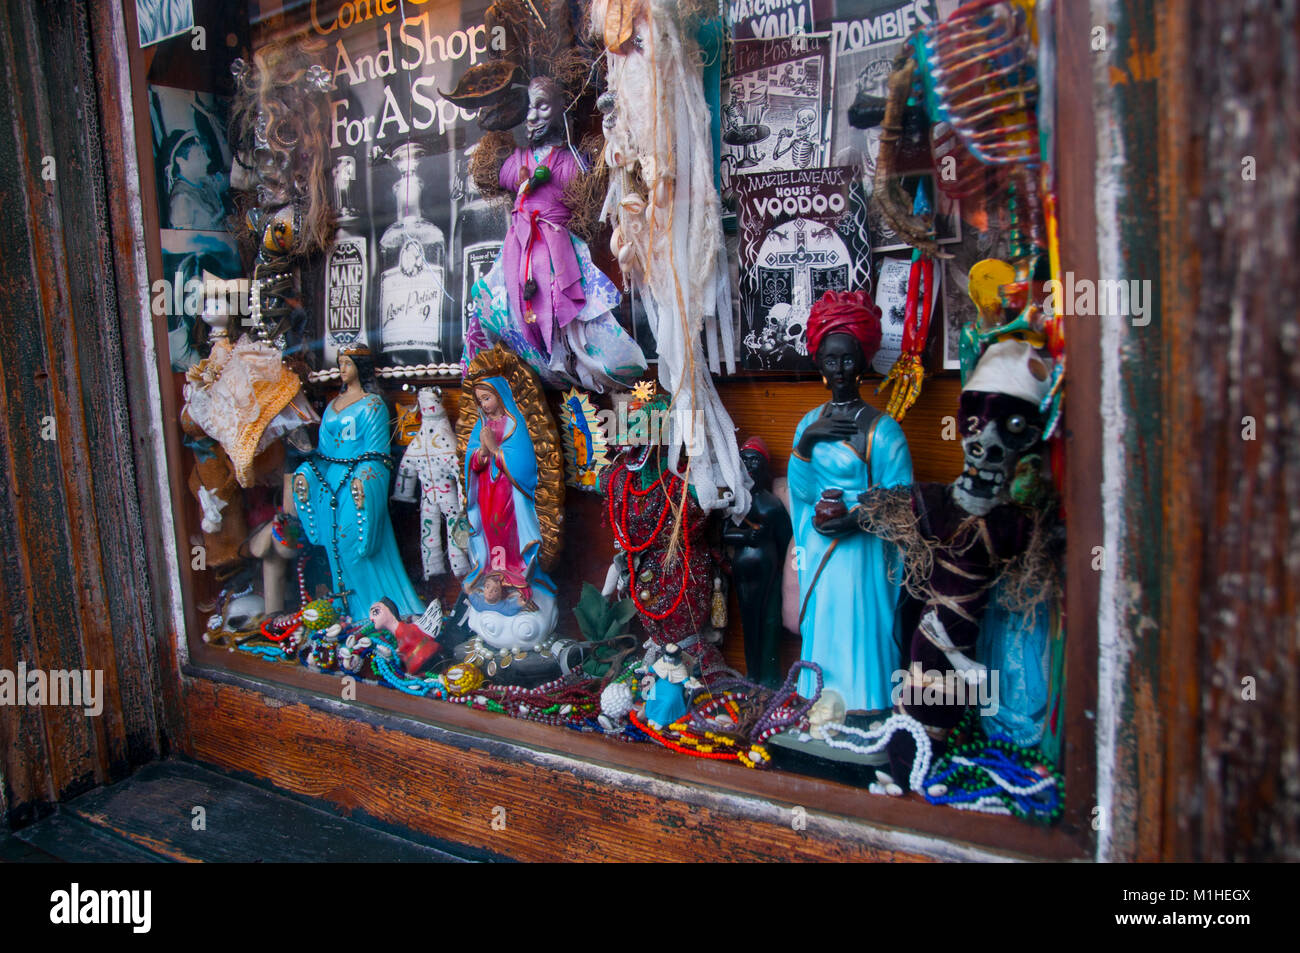 Rev. Zombies Voodoo Shop Store exterior New Orleans, Stock Photo